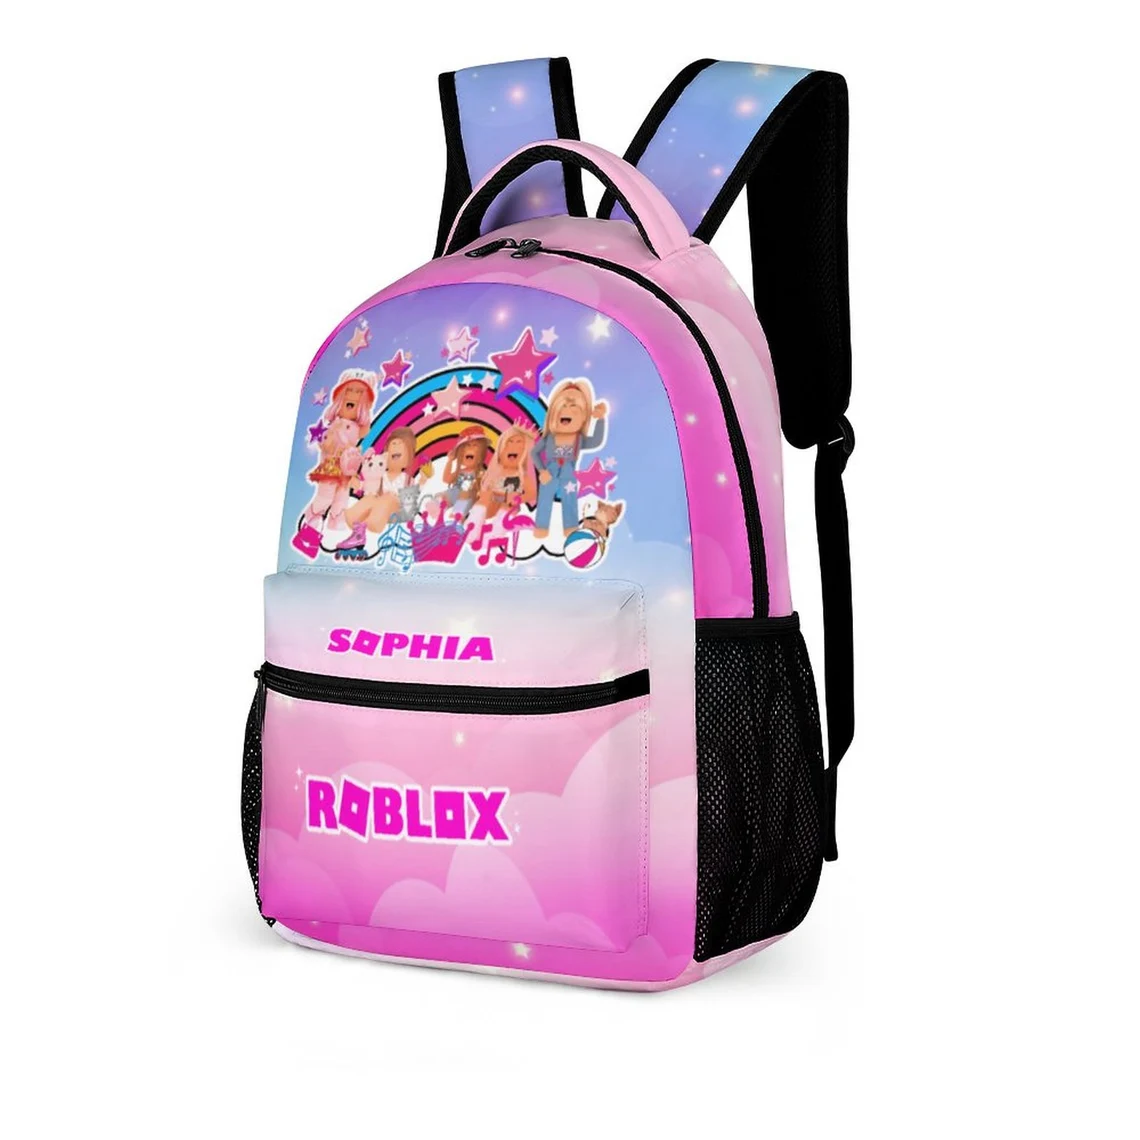 Personalized pink backpack for girls Roblox Girl customizable backpacks Cool Kiddo 10